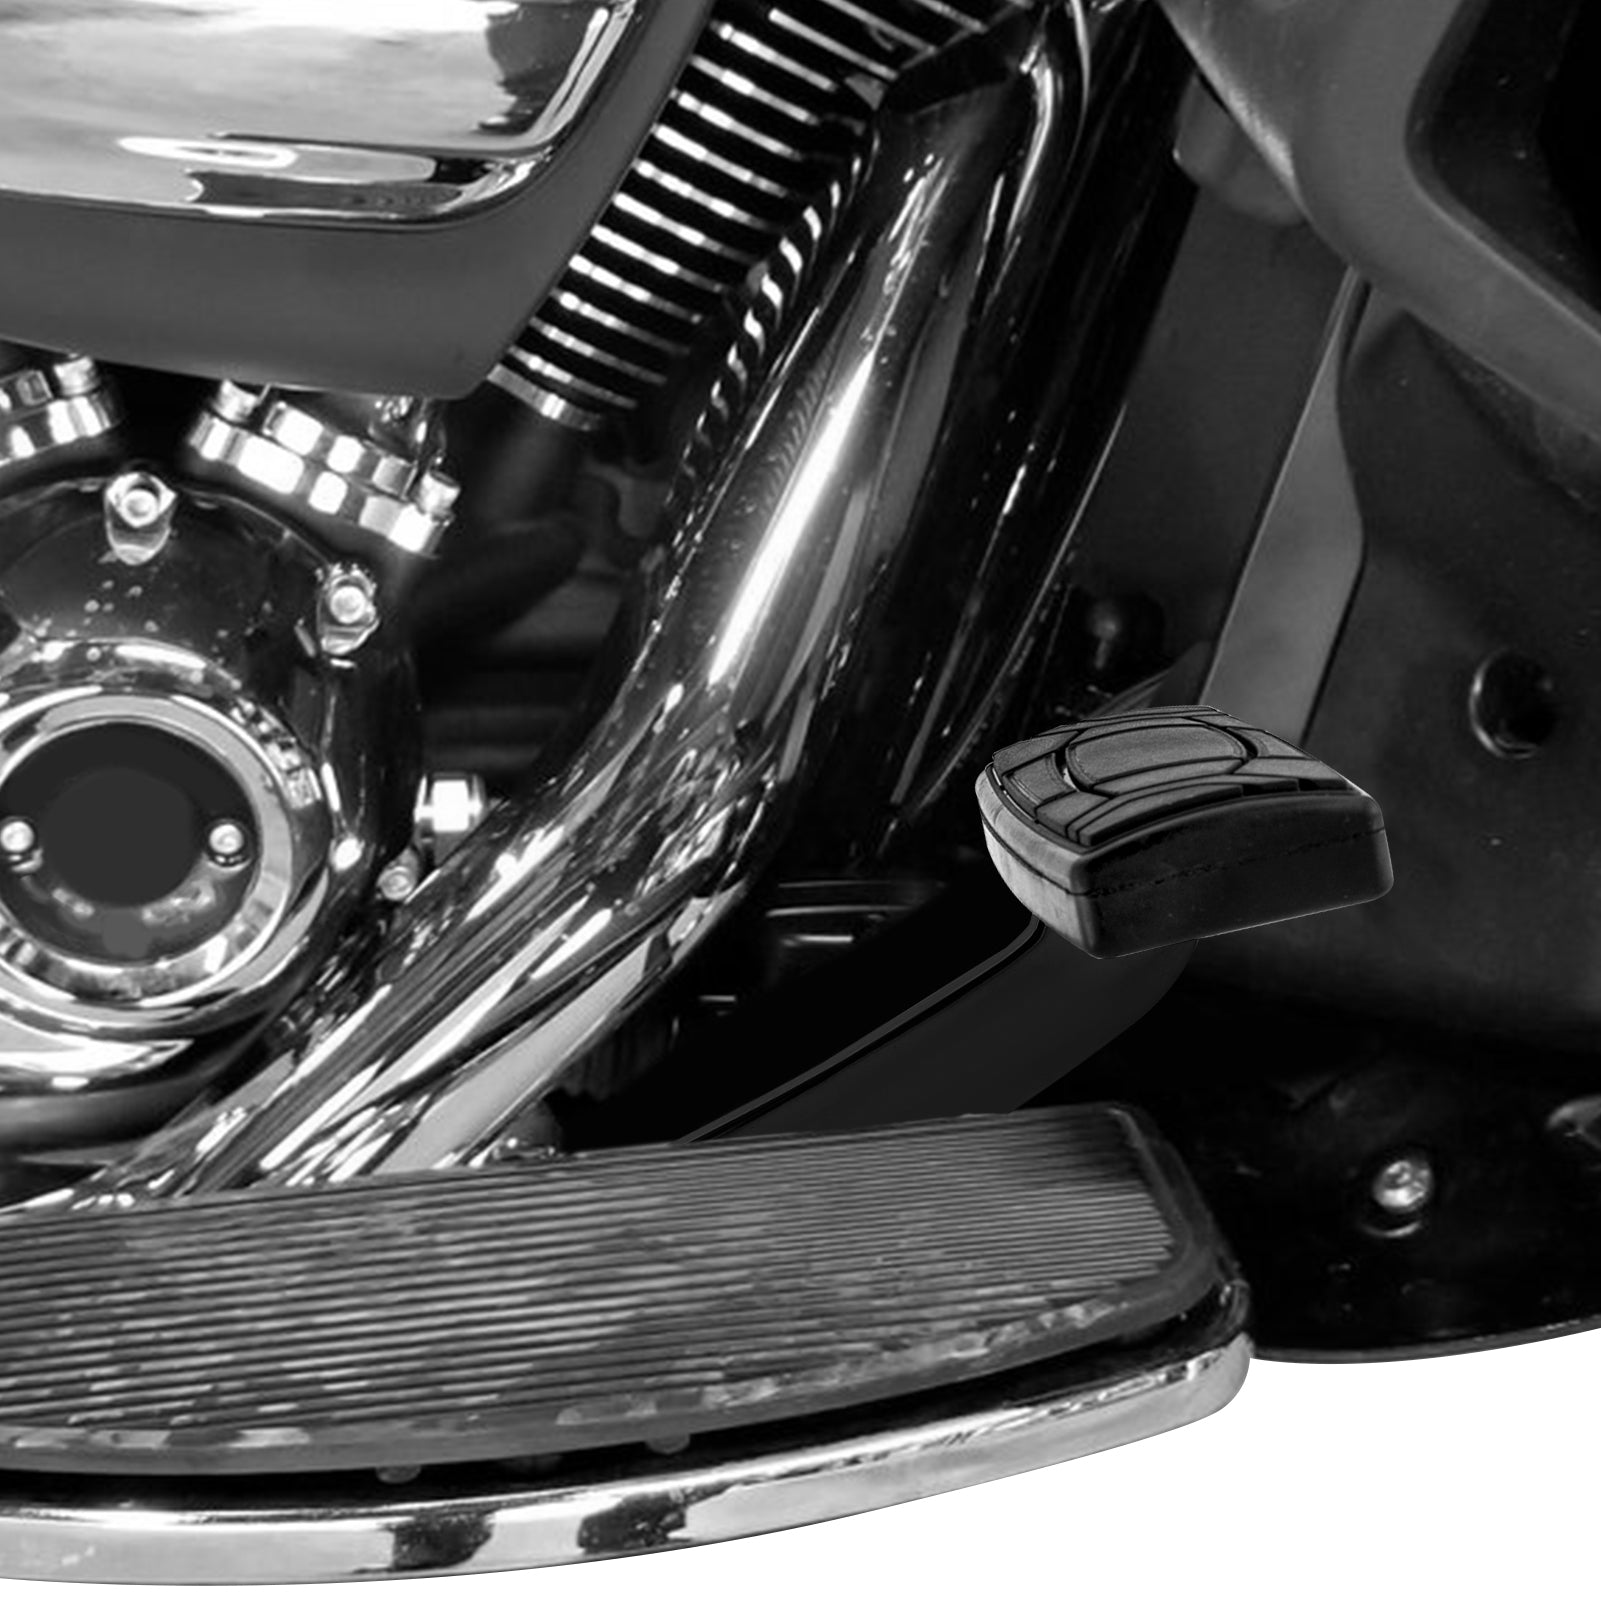 2014-2023 Harley Touring Models With Fairing Lowers Gloss Black Steel Rear Brake Pedals